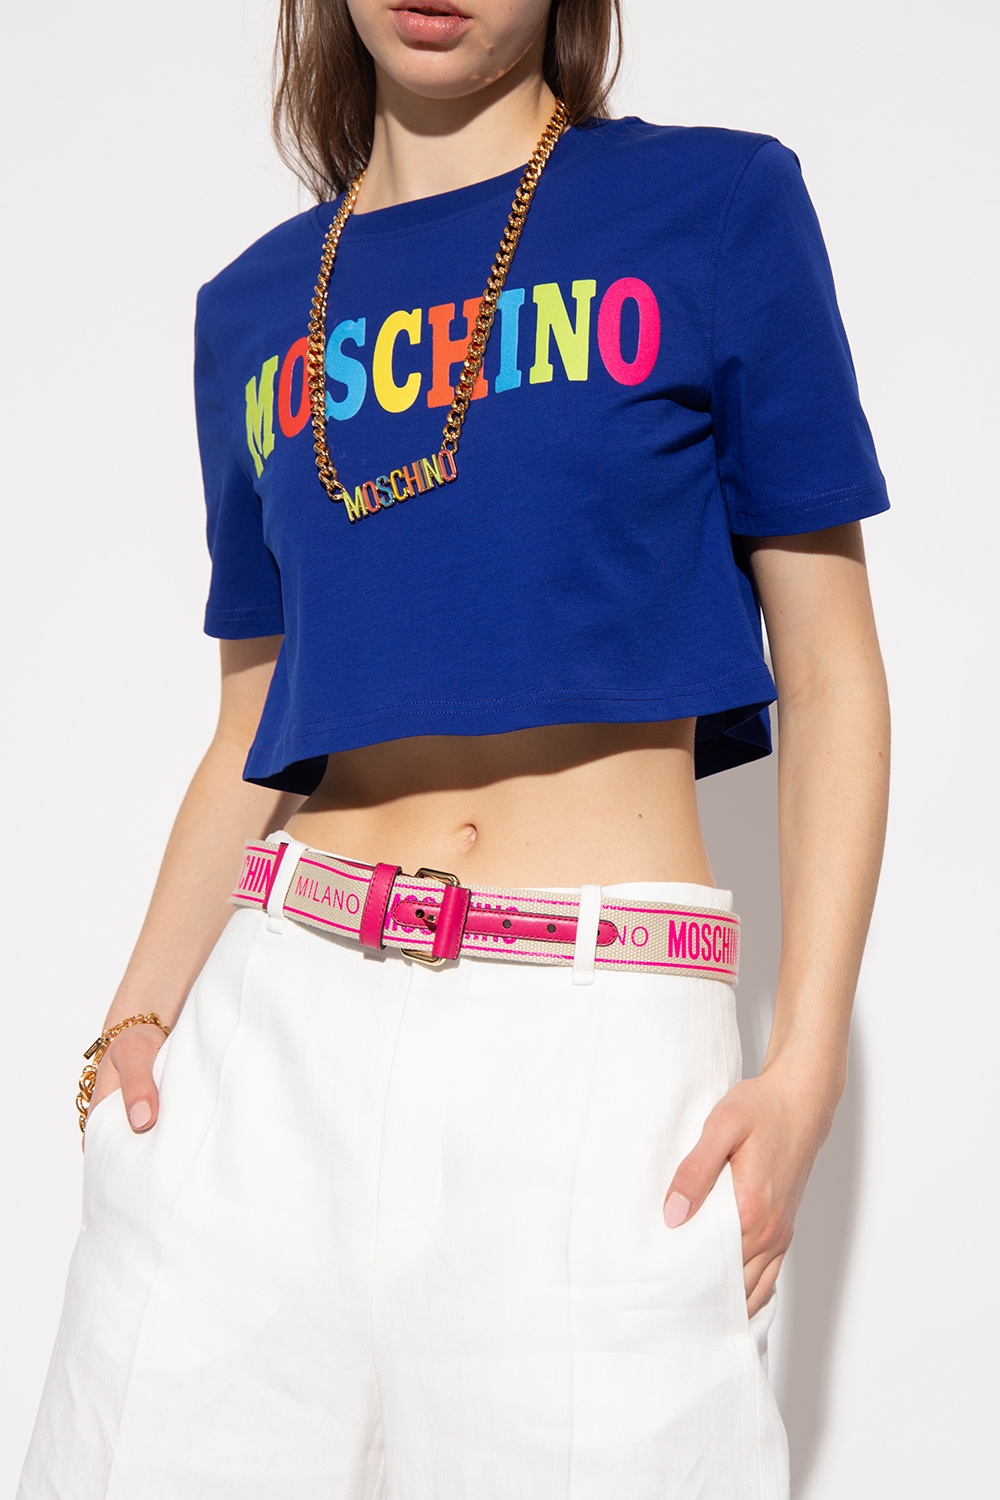 Moschino TRENDS FOR SPRING & SUMMER